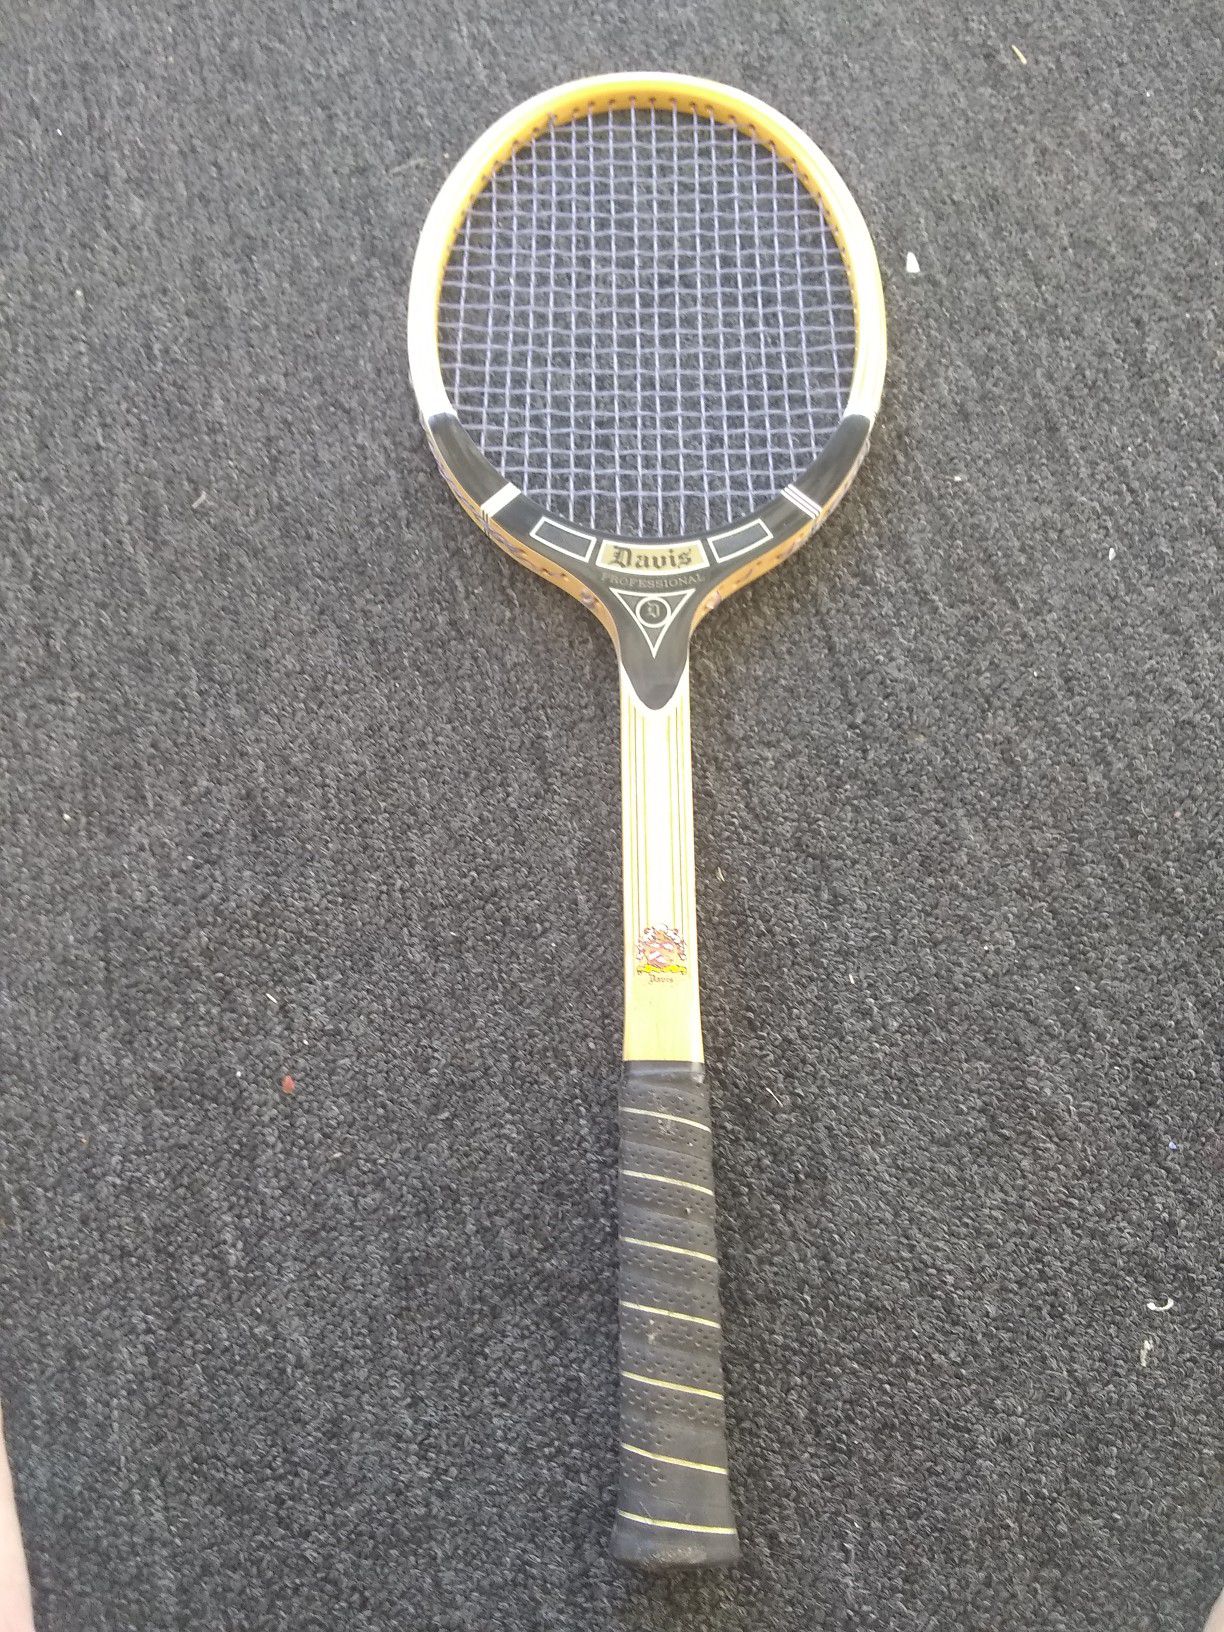 Davis tennis racket with cover